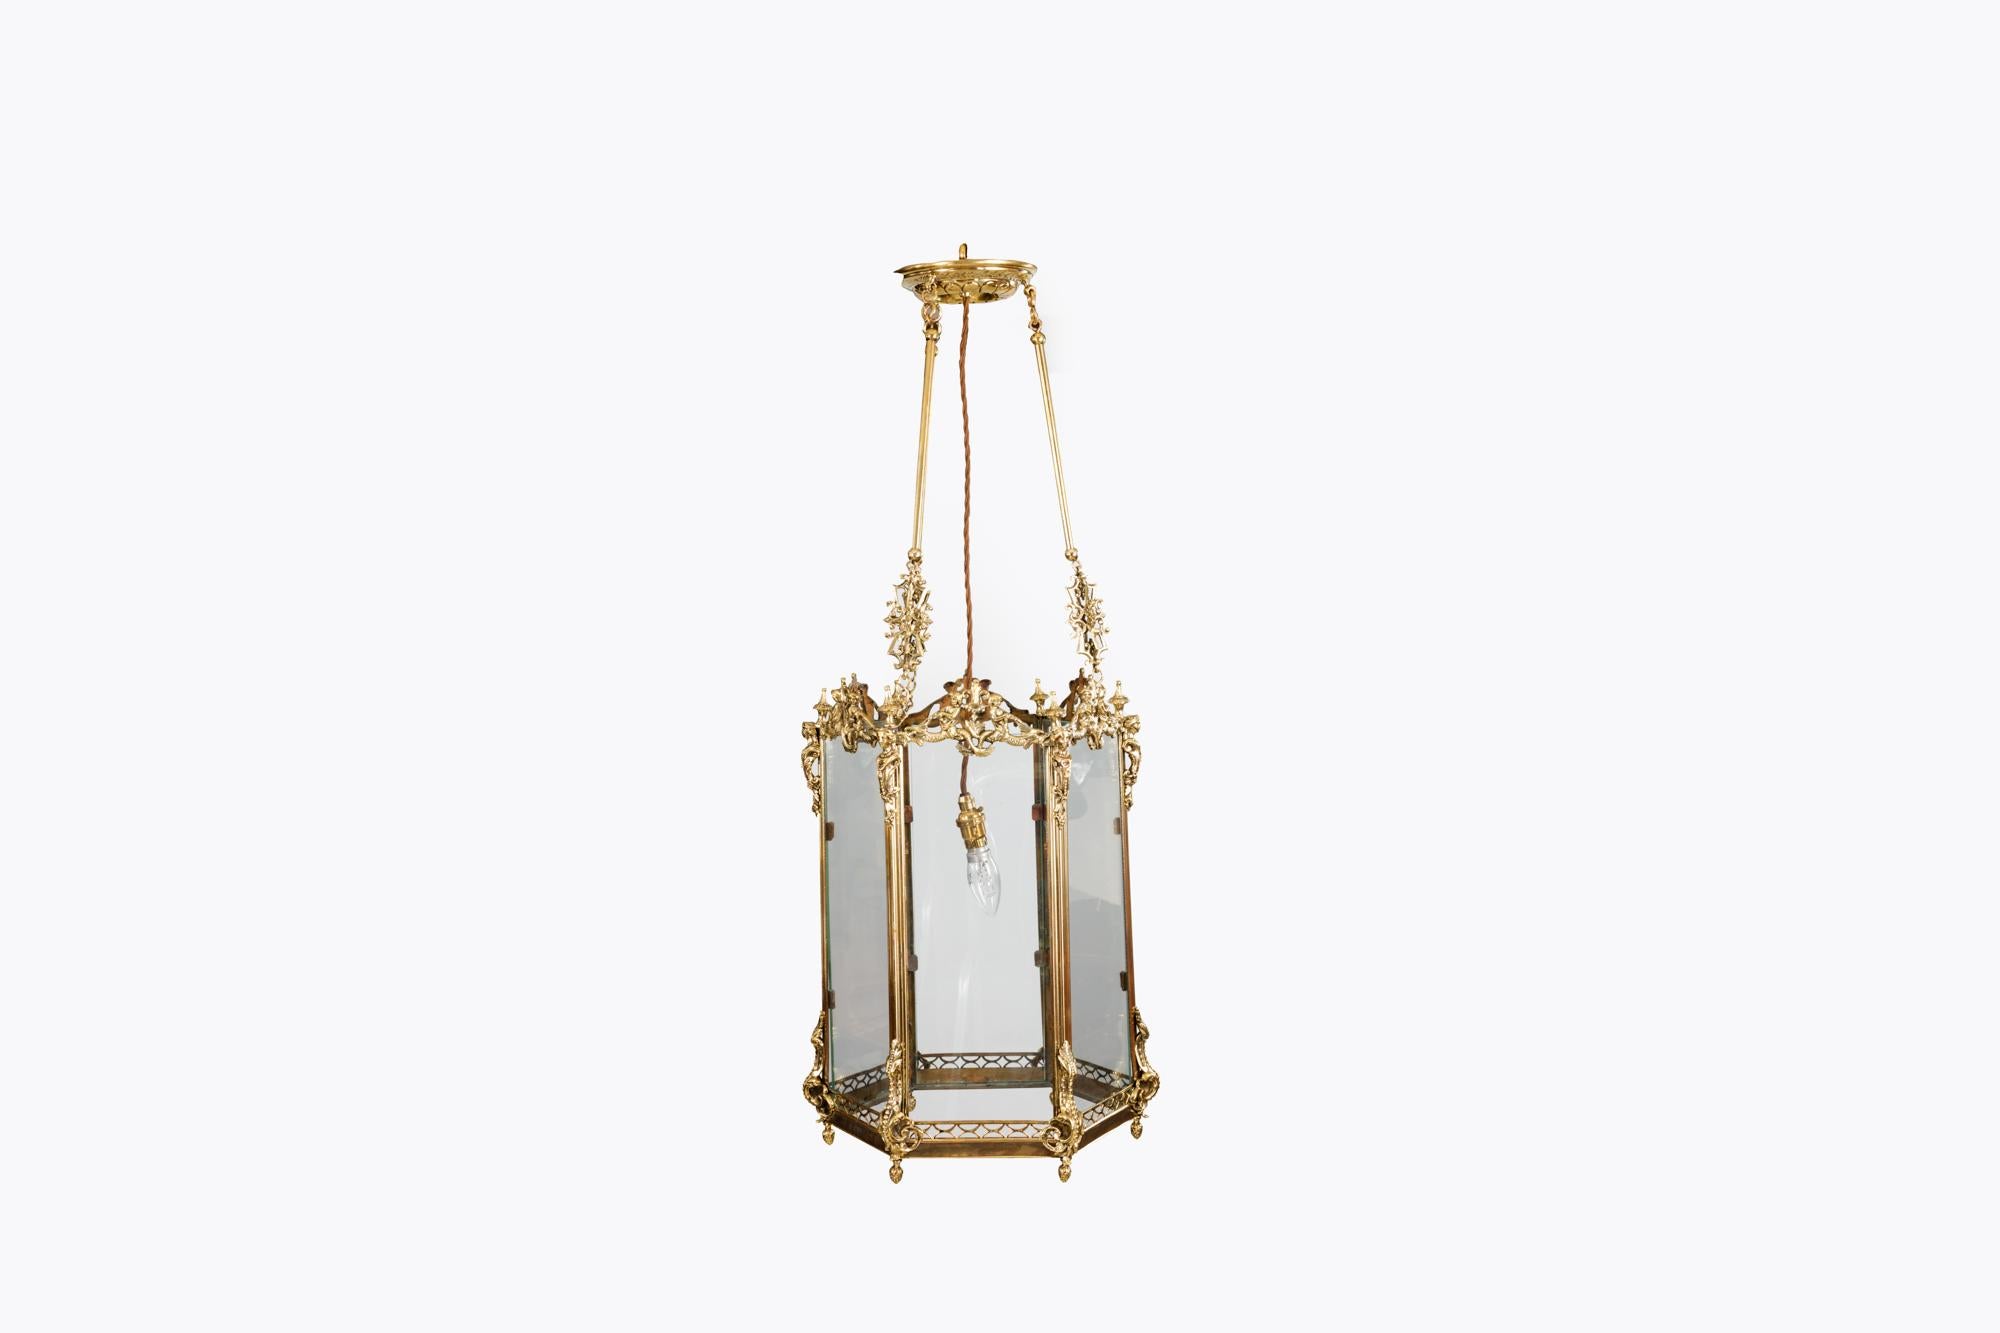 19th Century brass hexagonal hall lantern heavily decorated with neoclassical style figureheads, sea creatures and mermaids to the upper section, and terminating with naturalistic scrolling and stylised acorn finials below.